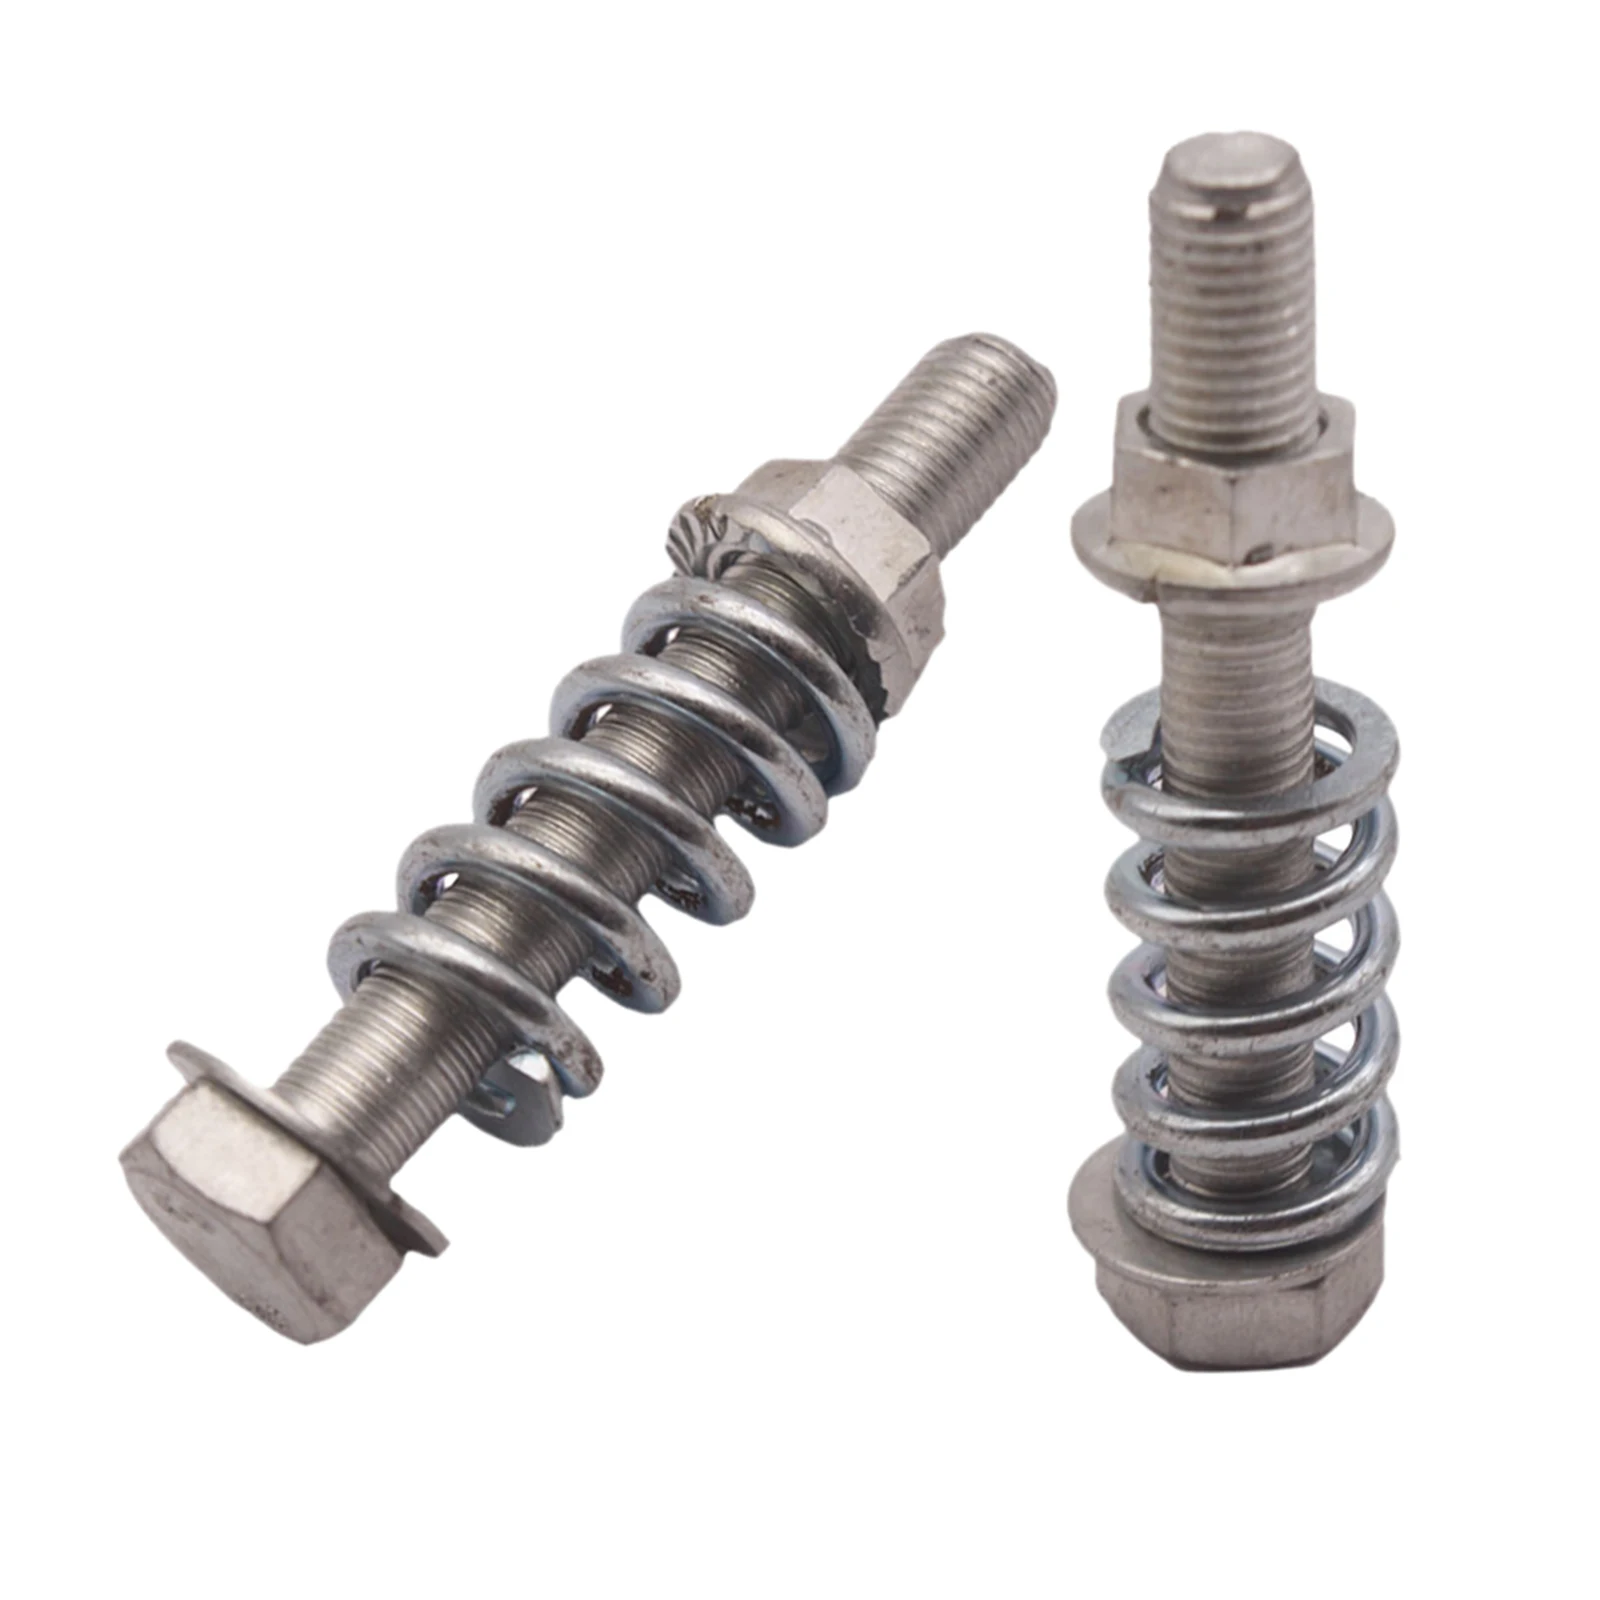 2 Sets Exhaust Bolt and Spring Kit M10-1.25 x 67mm Replacement Bolt Spring Hardware Kit 2 